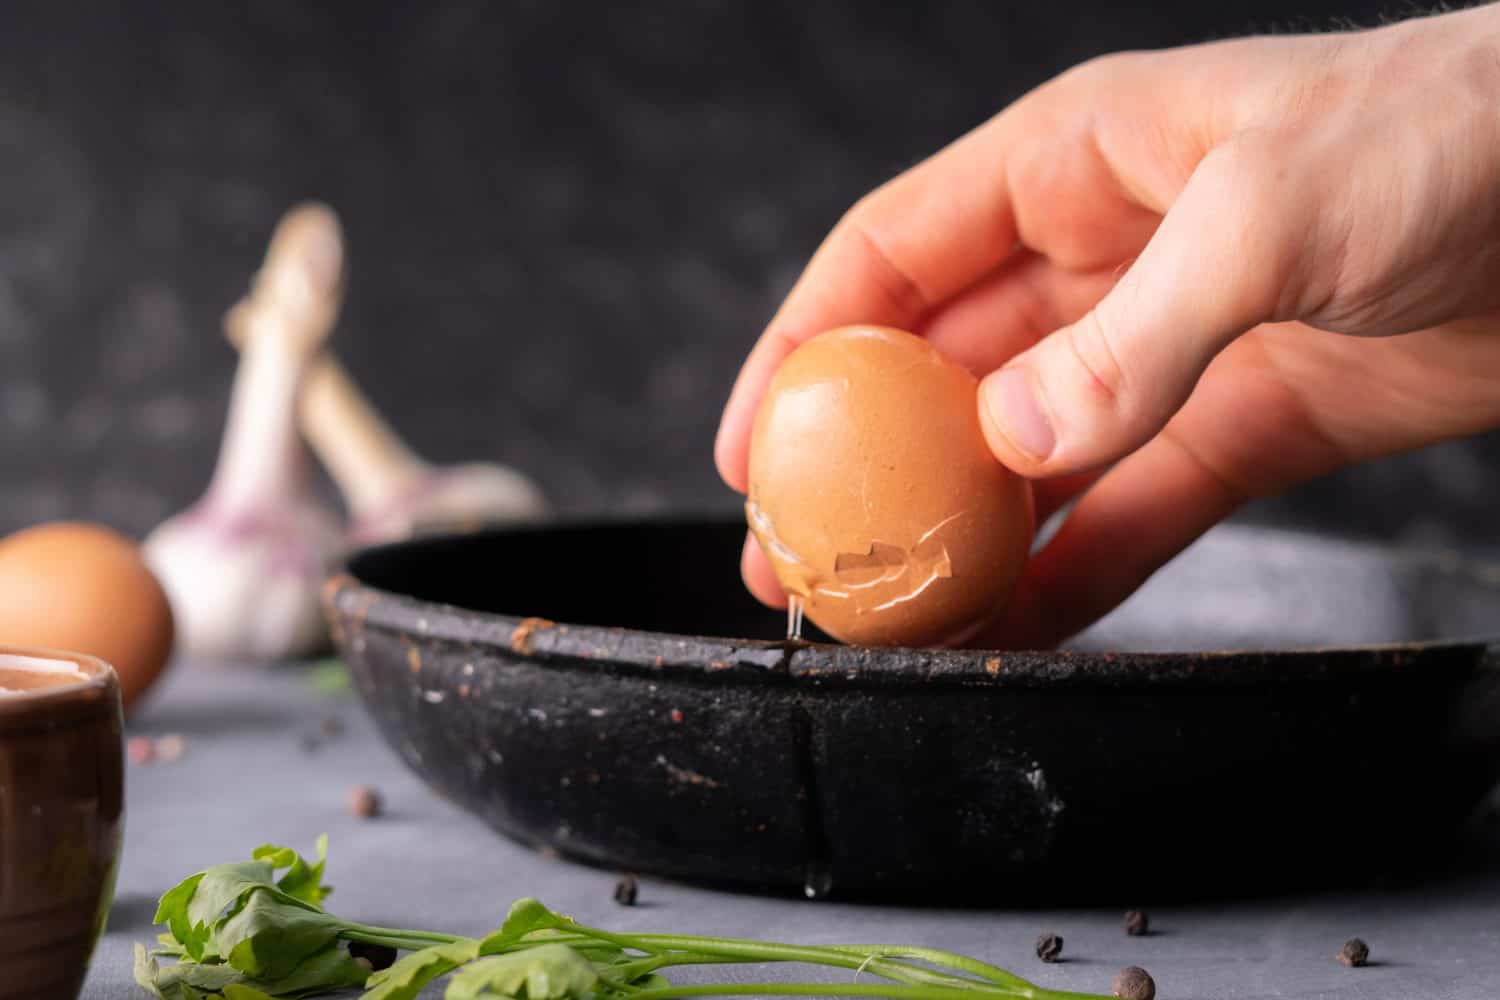 persons hand hold cracked egg and pour a yolk and protein in a frying pan to cook it, rustic style